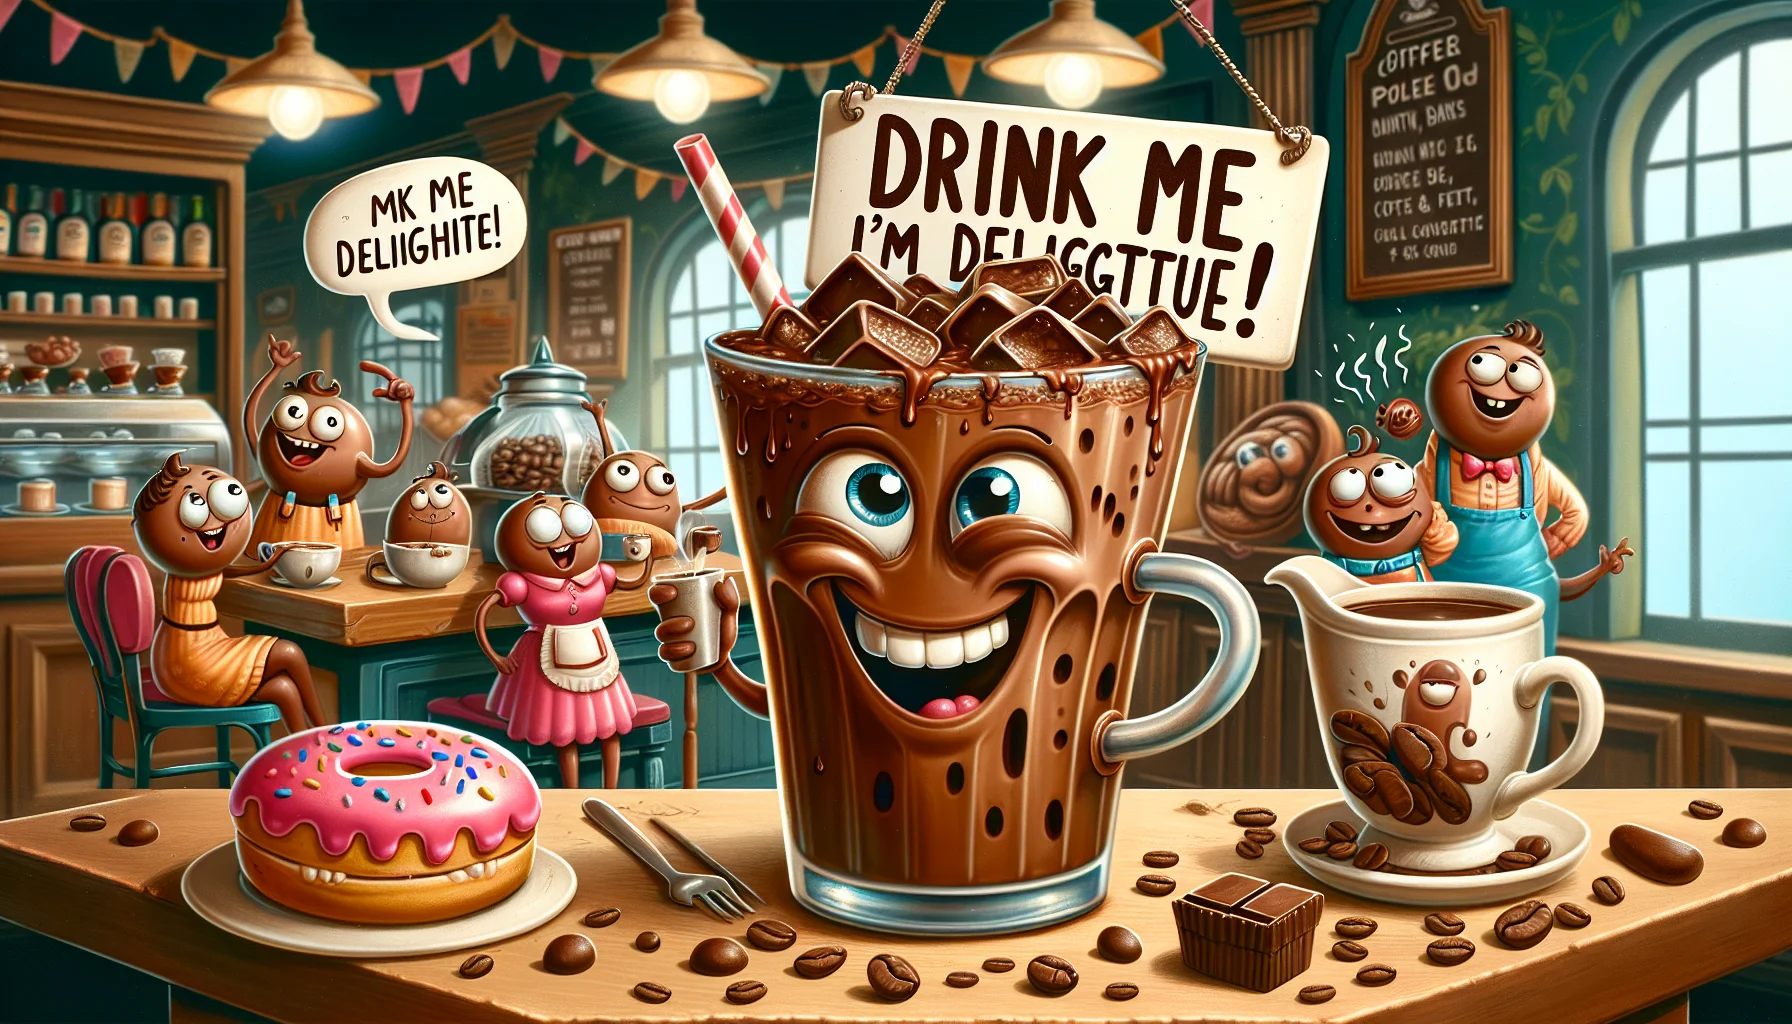 Humorous image of a large cup of iced mocha, set in a charming café scene. The iced mocha is anthropomorphized with wide eyes, quirky grin and holding a sign that reads 'Drink me, I'm delightful!'. The surrounding scene hums with laughter, as other café items like pastries and coffee beans also come to life, featuring expressive faces displaying a variety of playful emotions. The overall visual narrative aims to elicit a cheerful and inviting feeling, encouraging viewers to indulge in the joy of savoring a delicious iced mocha.